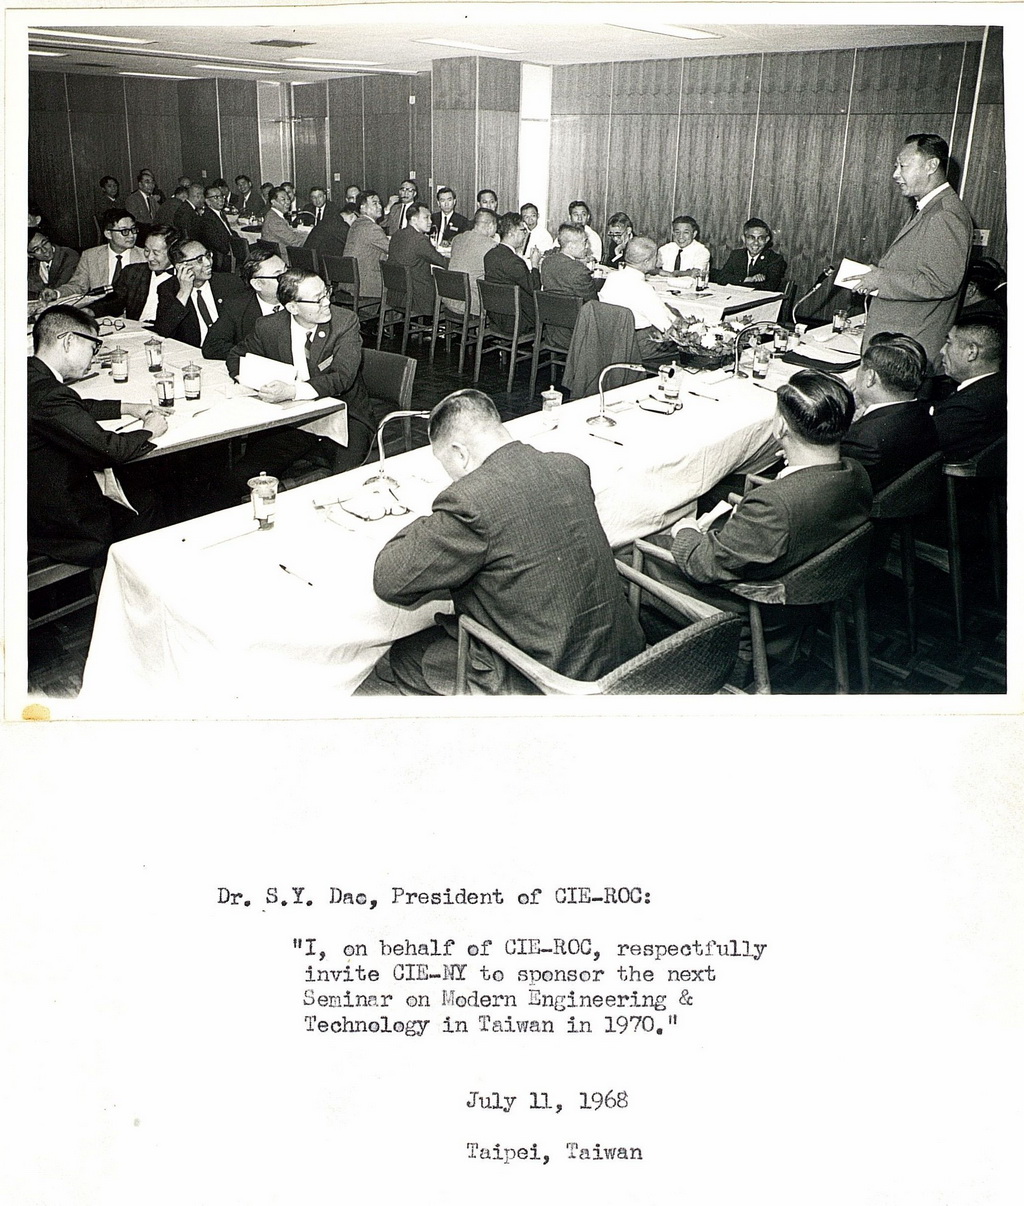 Photos of the 1968 seminar on Modern Engineering and Technology.